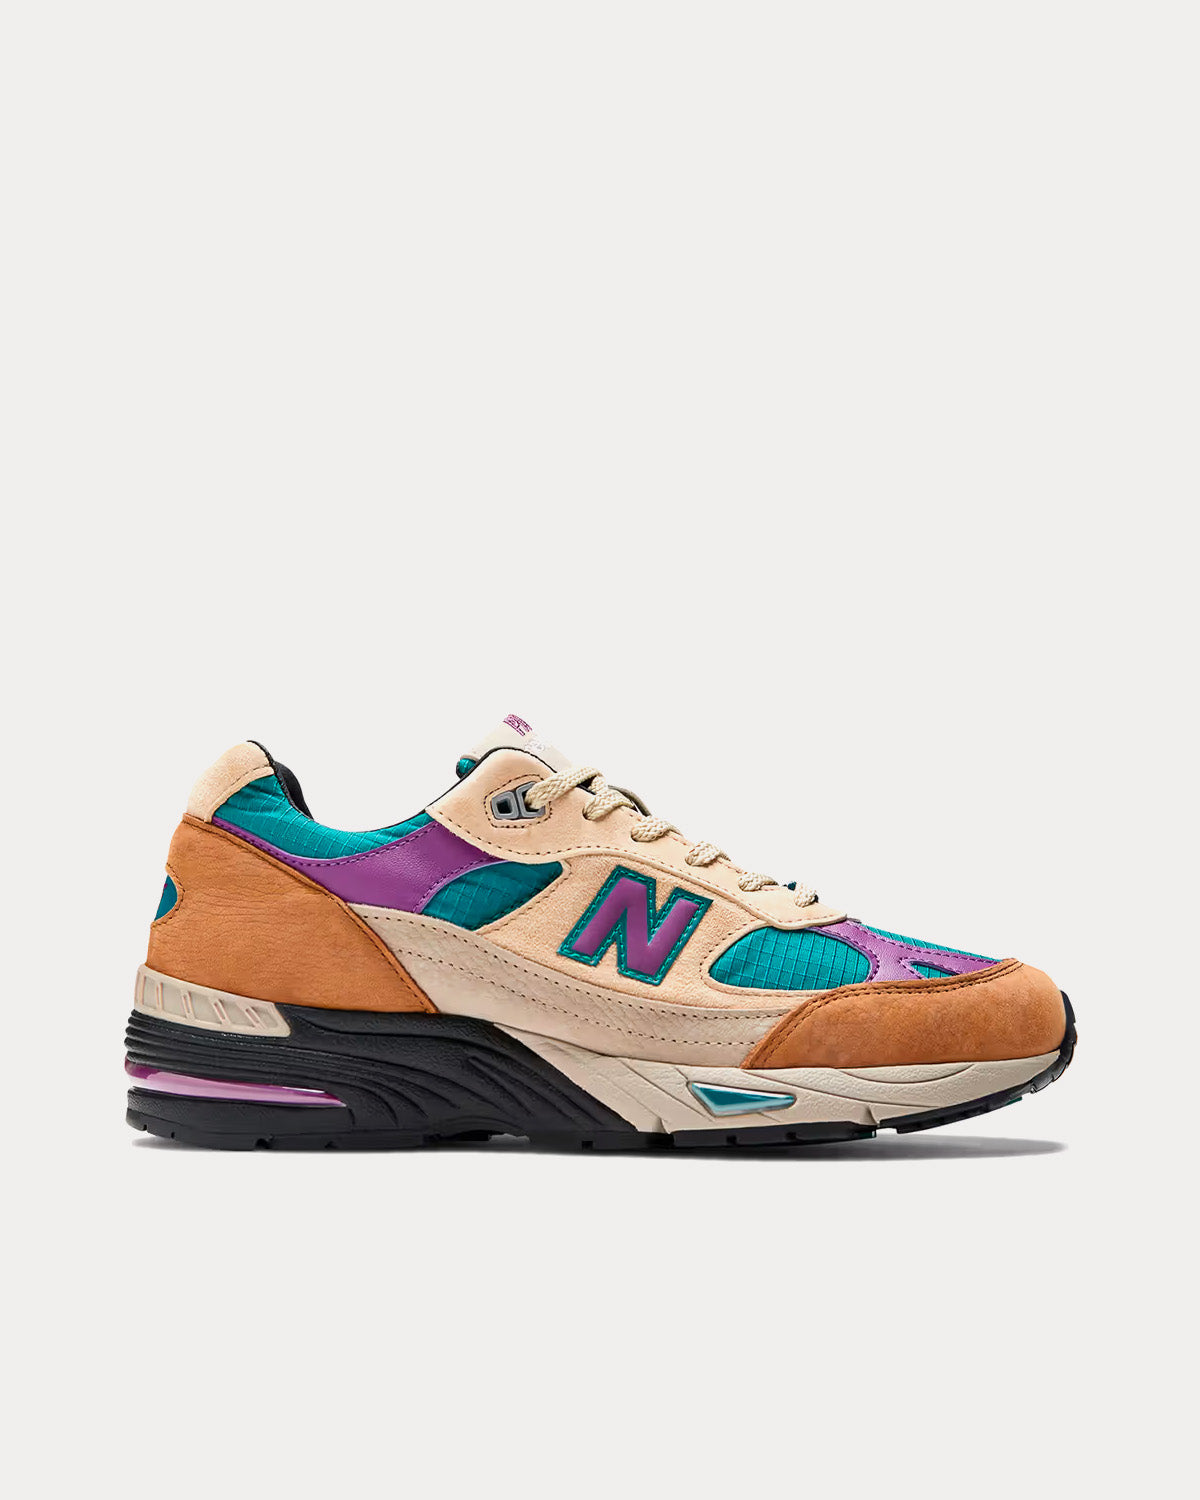 New Balance x Palace - Made In UK 991 Beige / Teal / Purple Low Top Sneakers